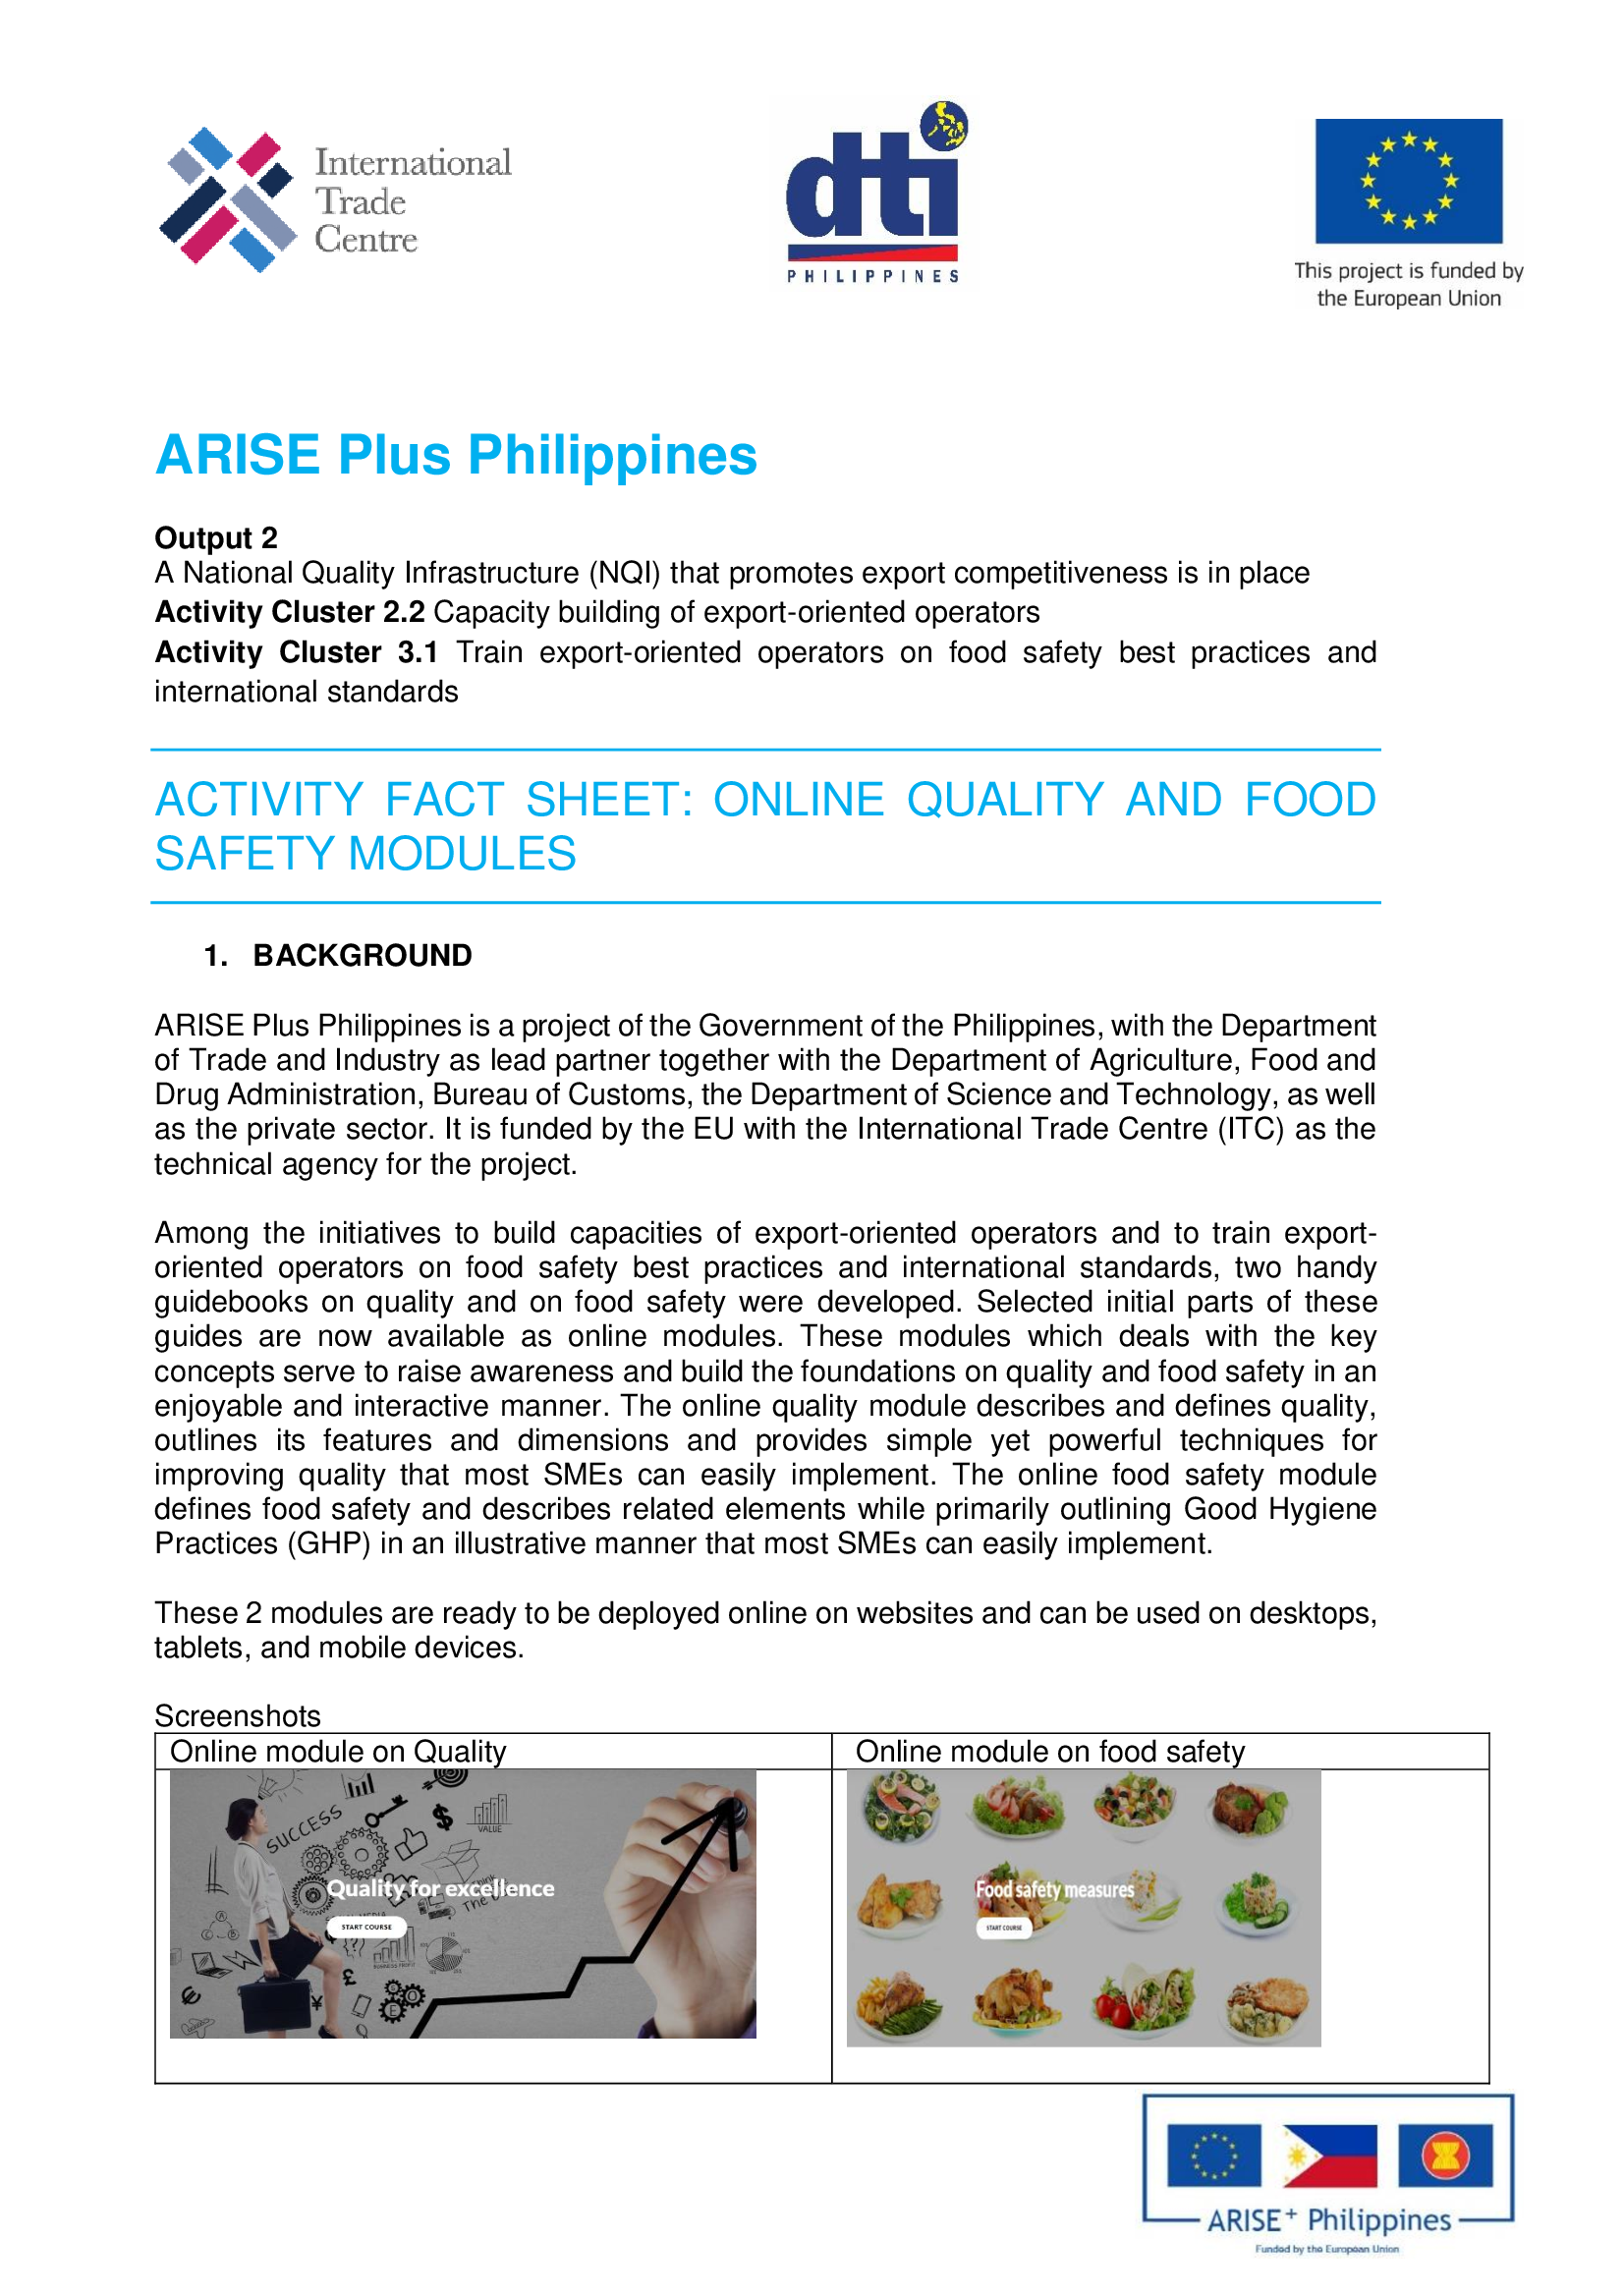 ACTIVITY FACT SHEET: ONLINE QUALITY AND FOOD SAFETY MODULES